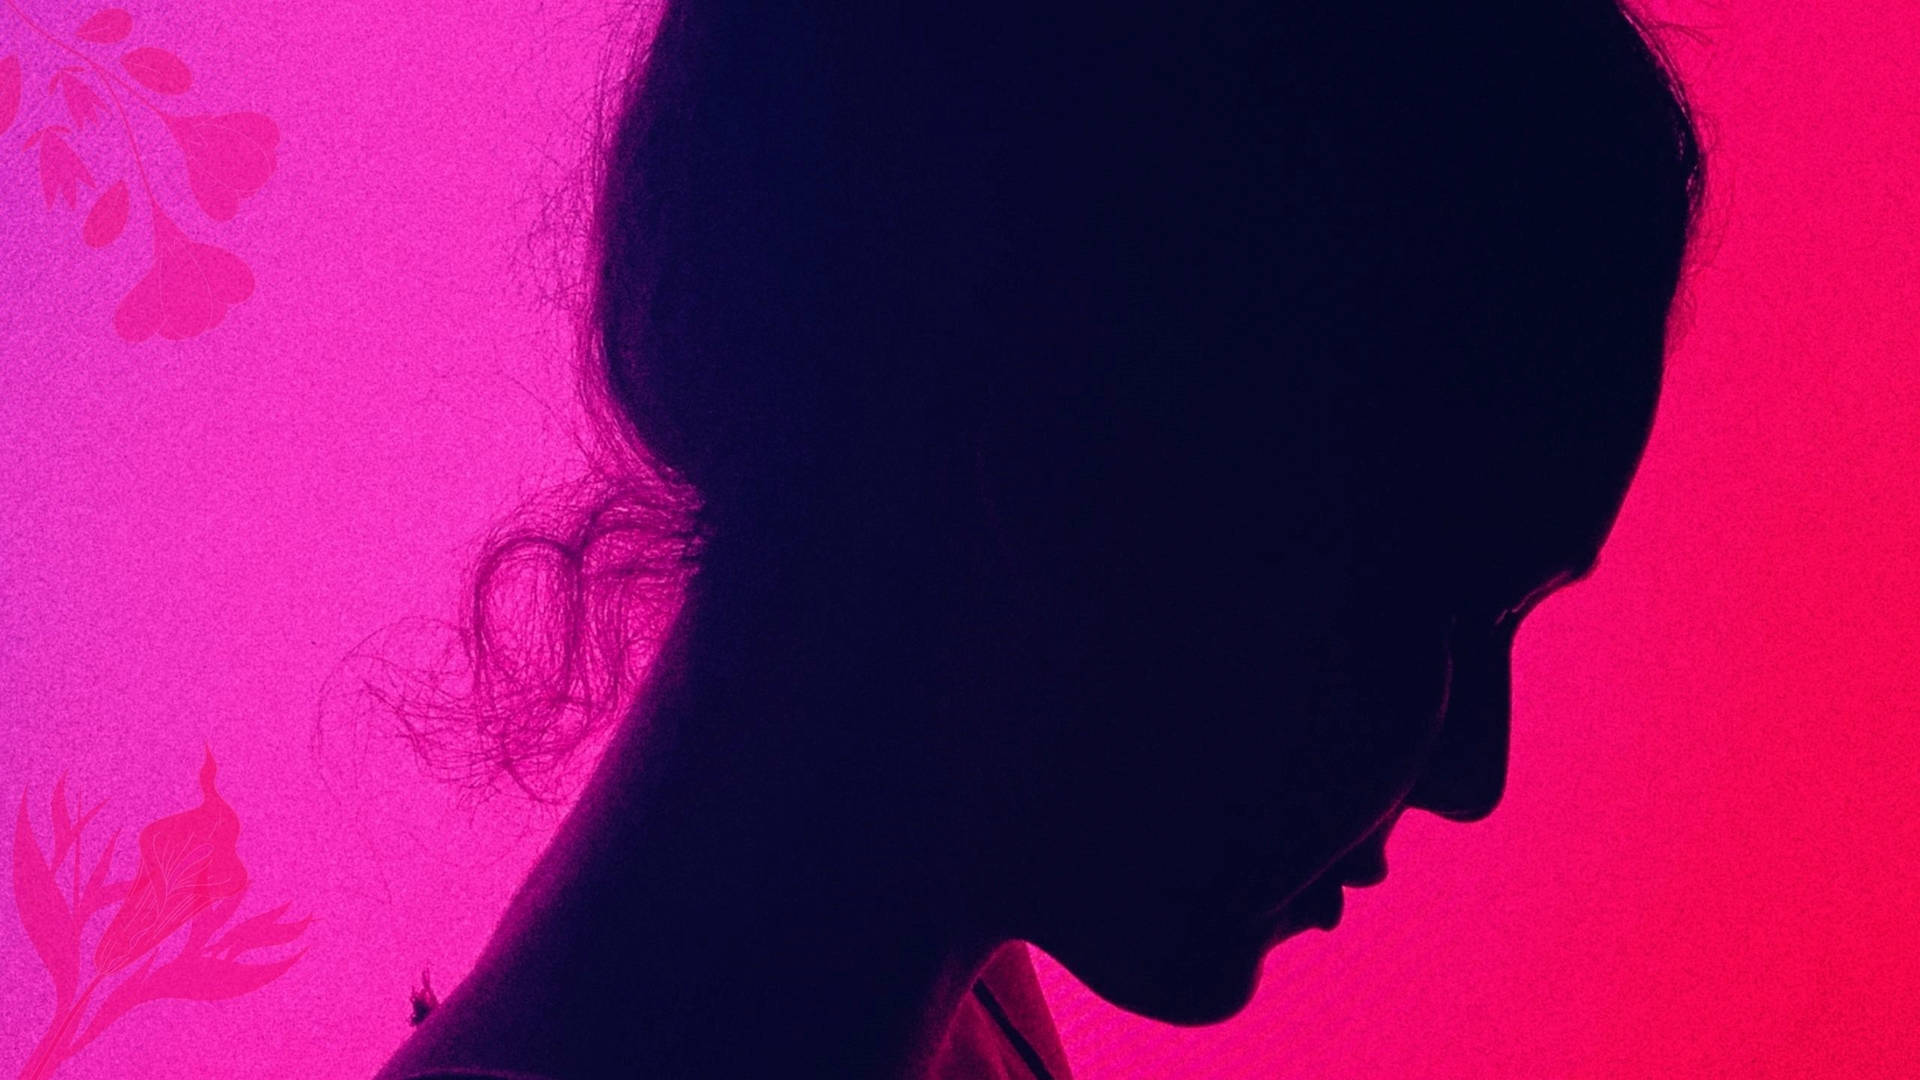 Neon Pink Aesthetic Femme Side Profile